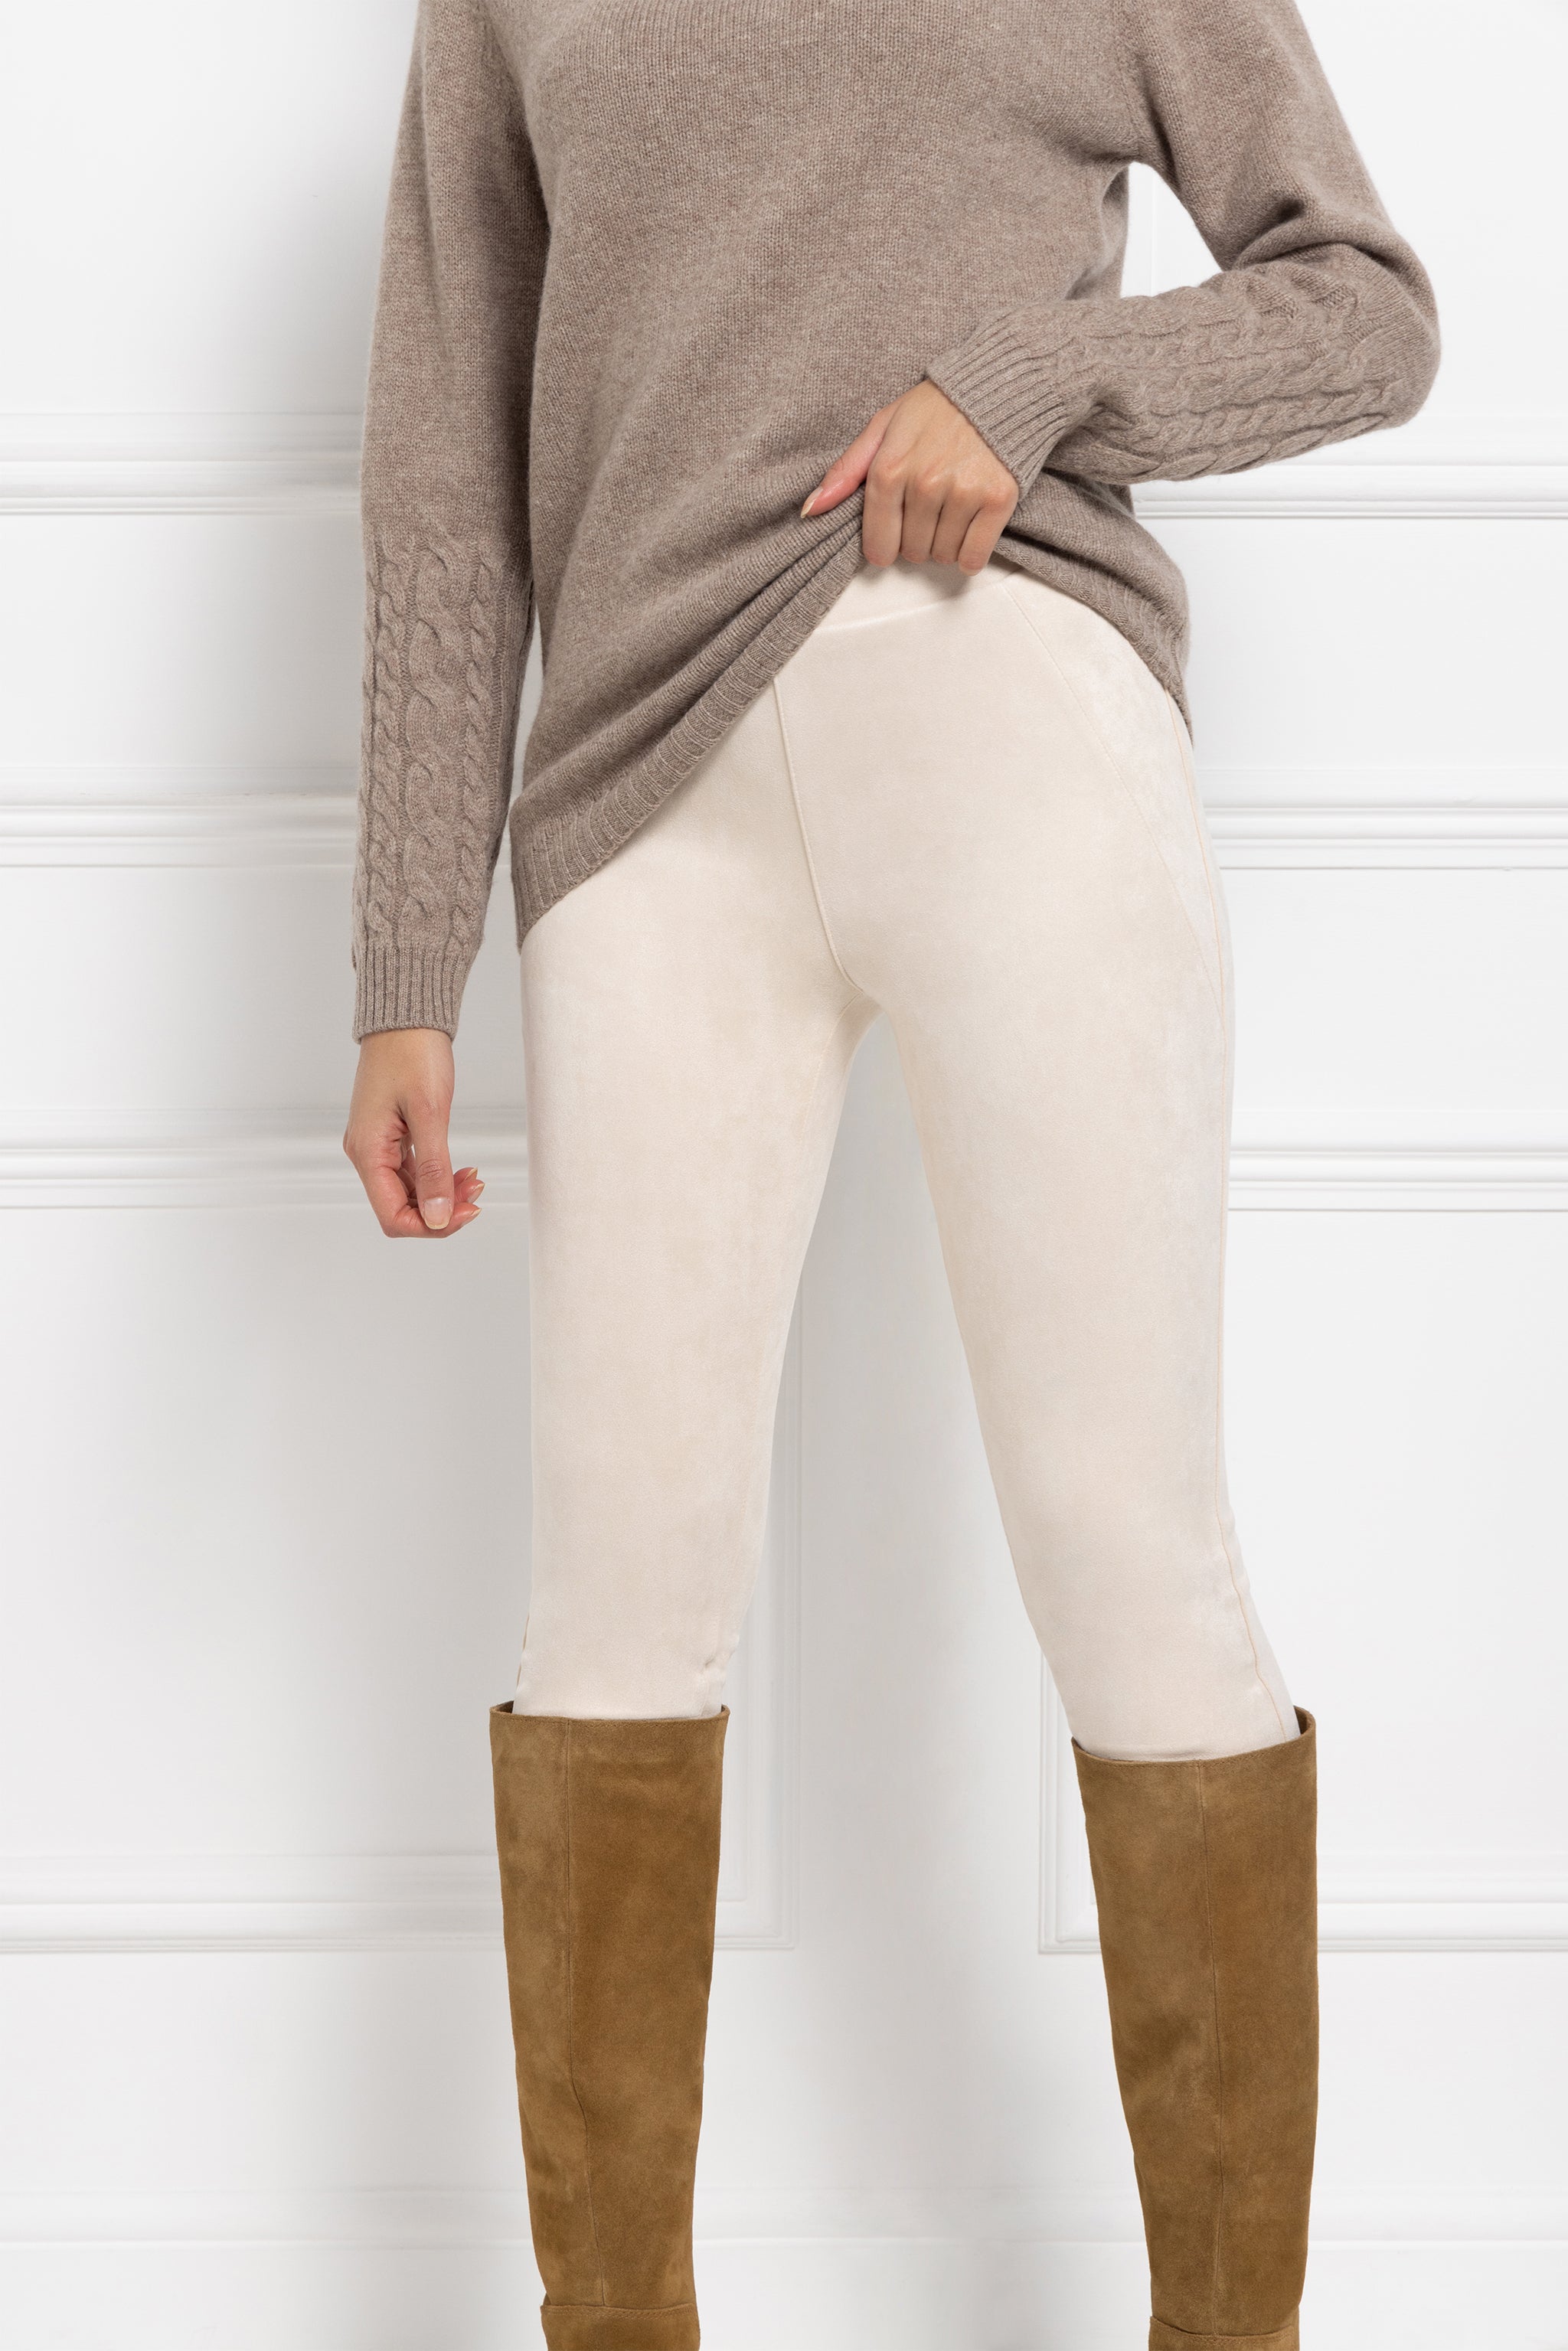 LOFT - One really good reason to fall for our perfect faux suede leggings.